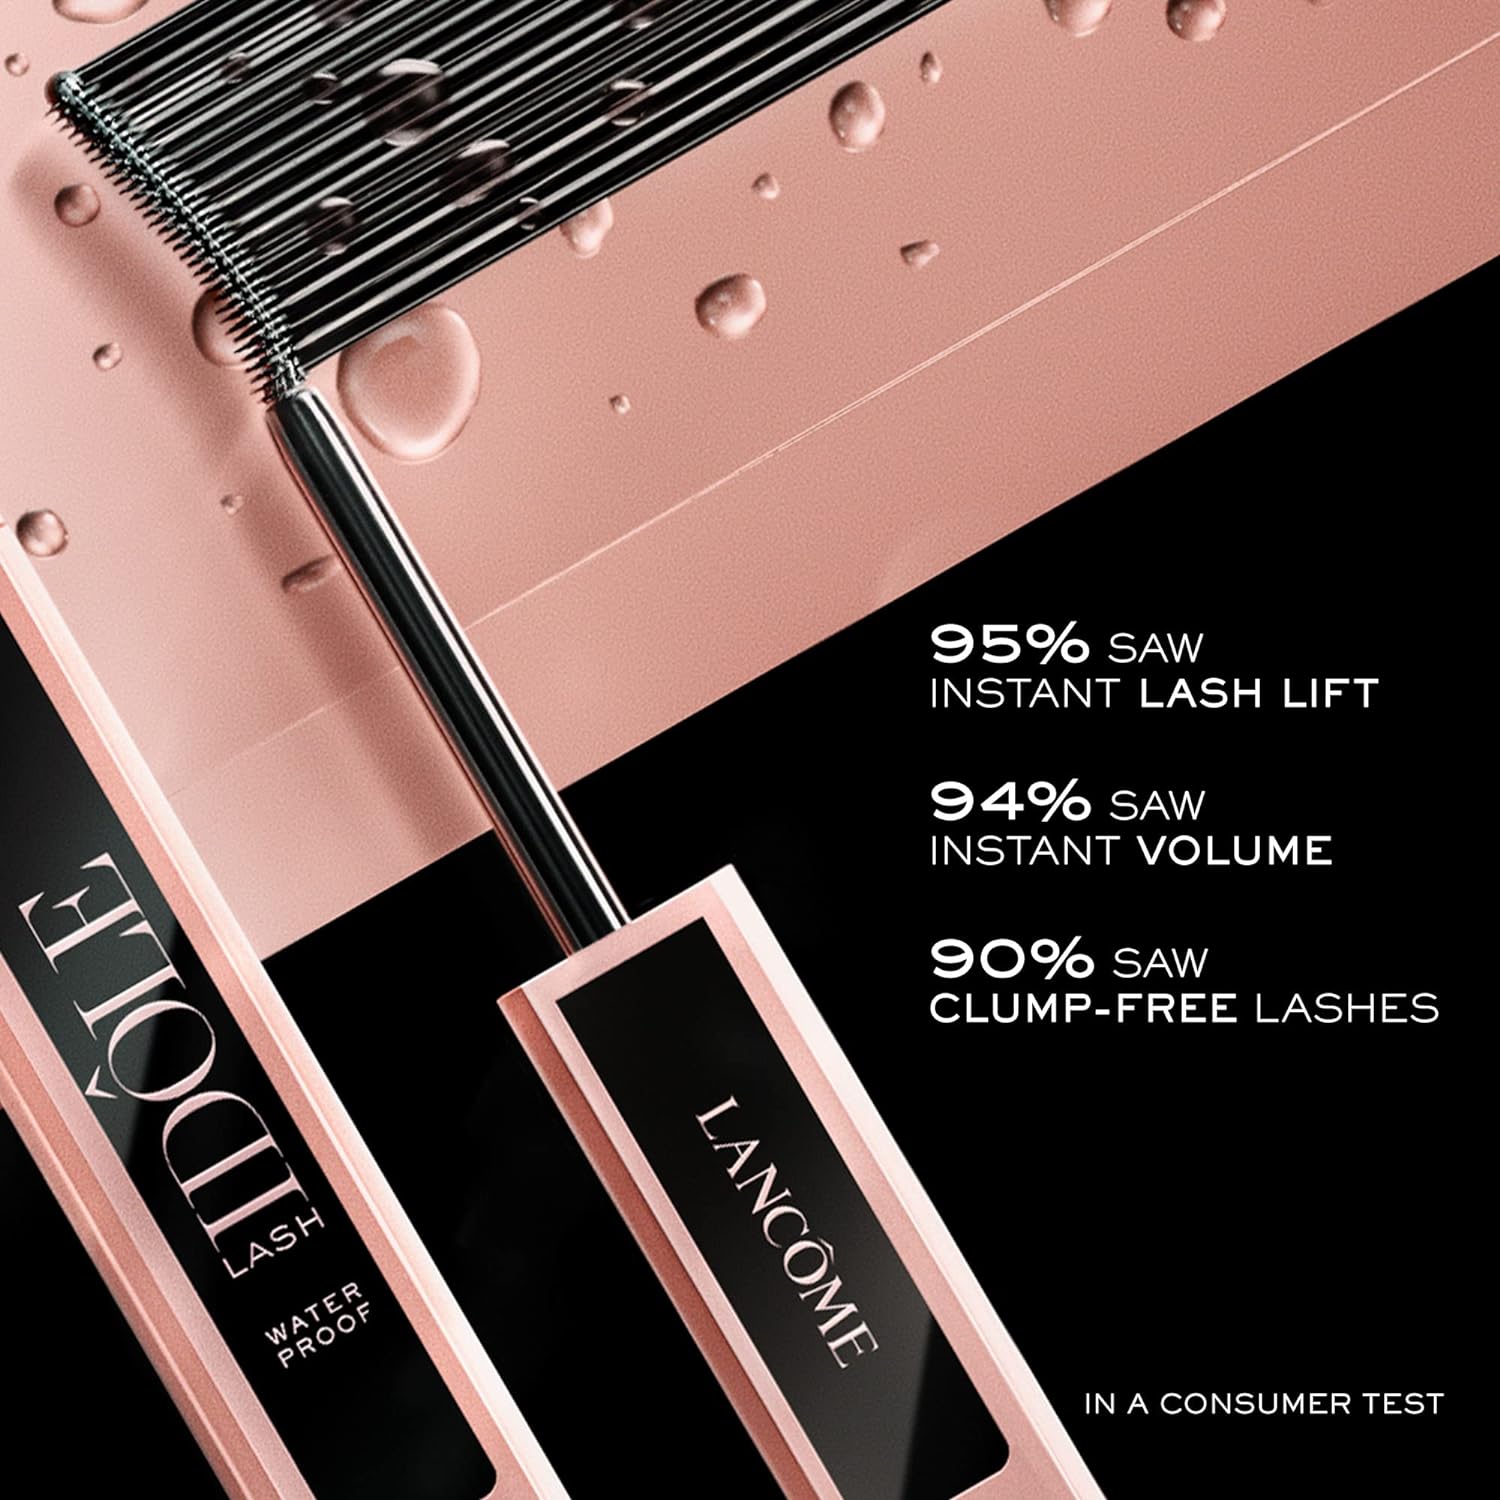 Lash Idôle Lash-Lifting & Volumizing Waterproof Mascara - Black Mascara for Instant Volume, Length & Lift - Smudge Proof & Up To 24H Wear - Black : Beauty & Personal Care